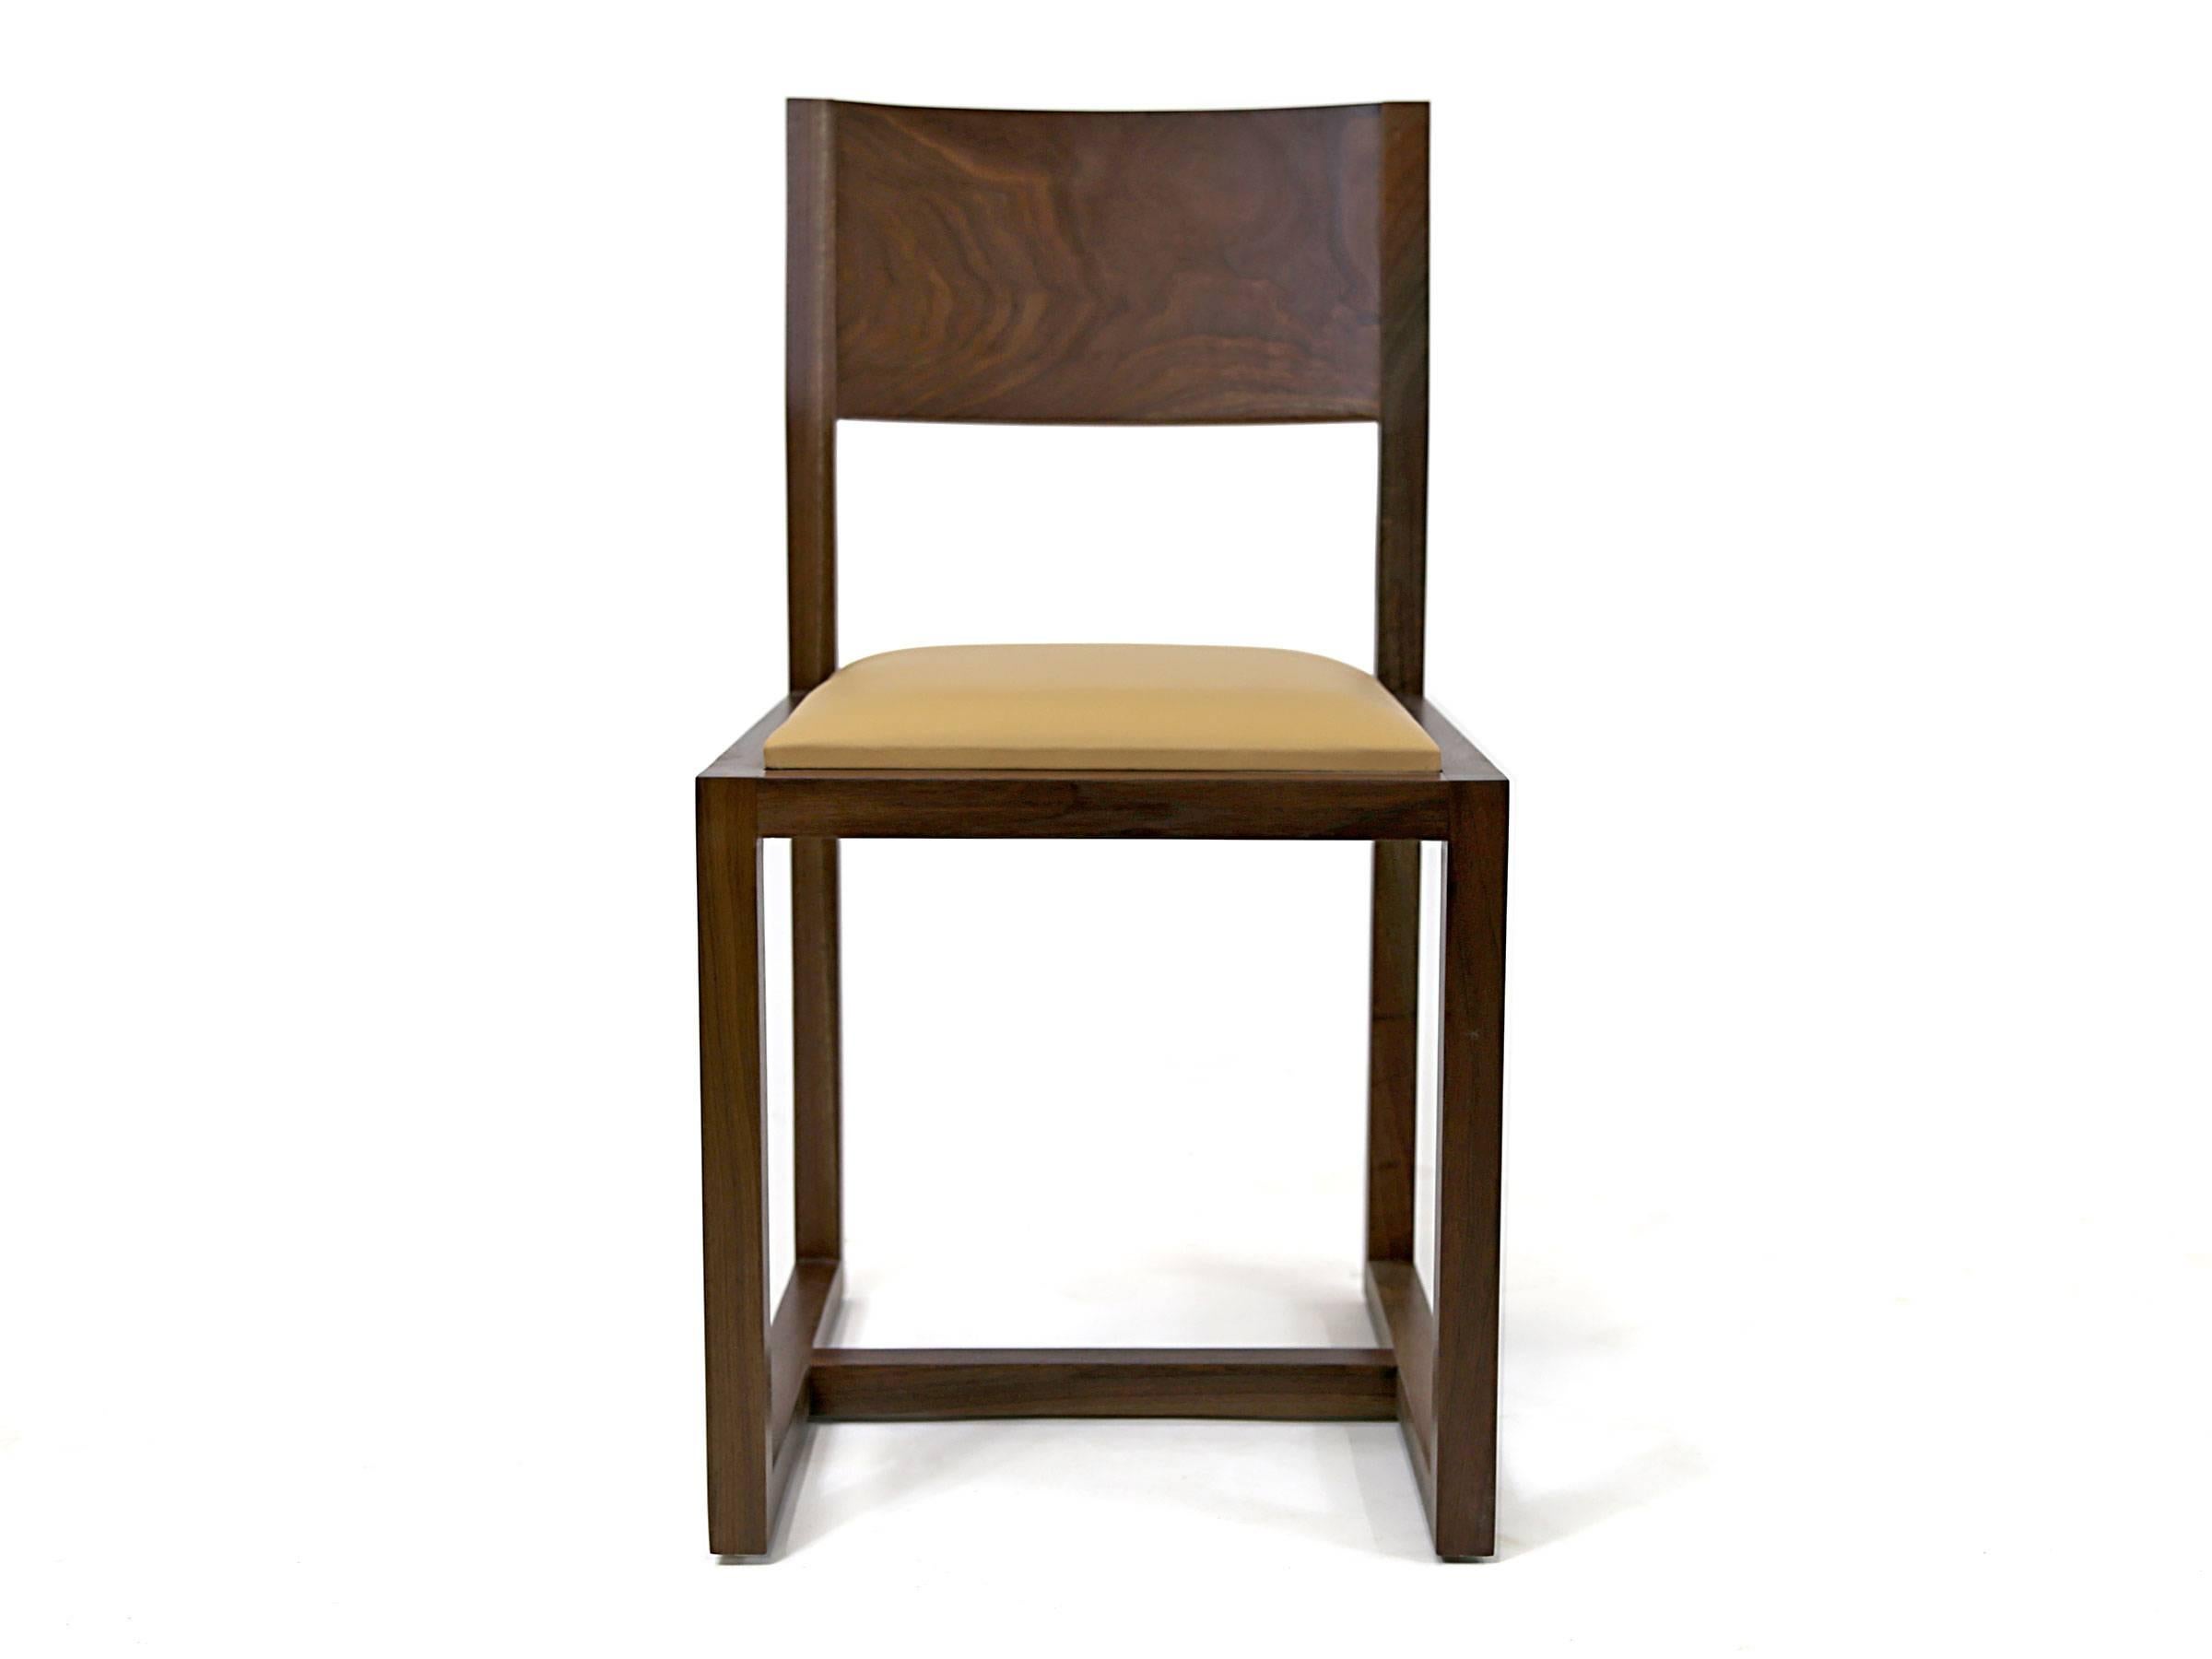 A contemporary hardwood chair with curved back made from solid wood, and an upholstered seat. A straightforward design. Simplicity incarnate. Made to order in Brooklyn. Shown in walnut with a tan leather seat. Other options are available. Discounts